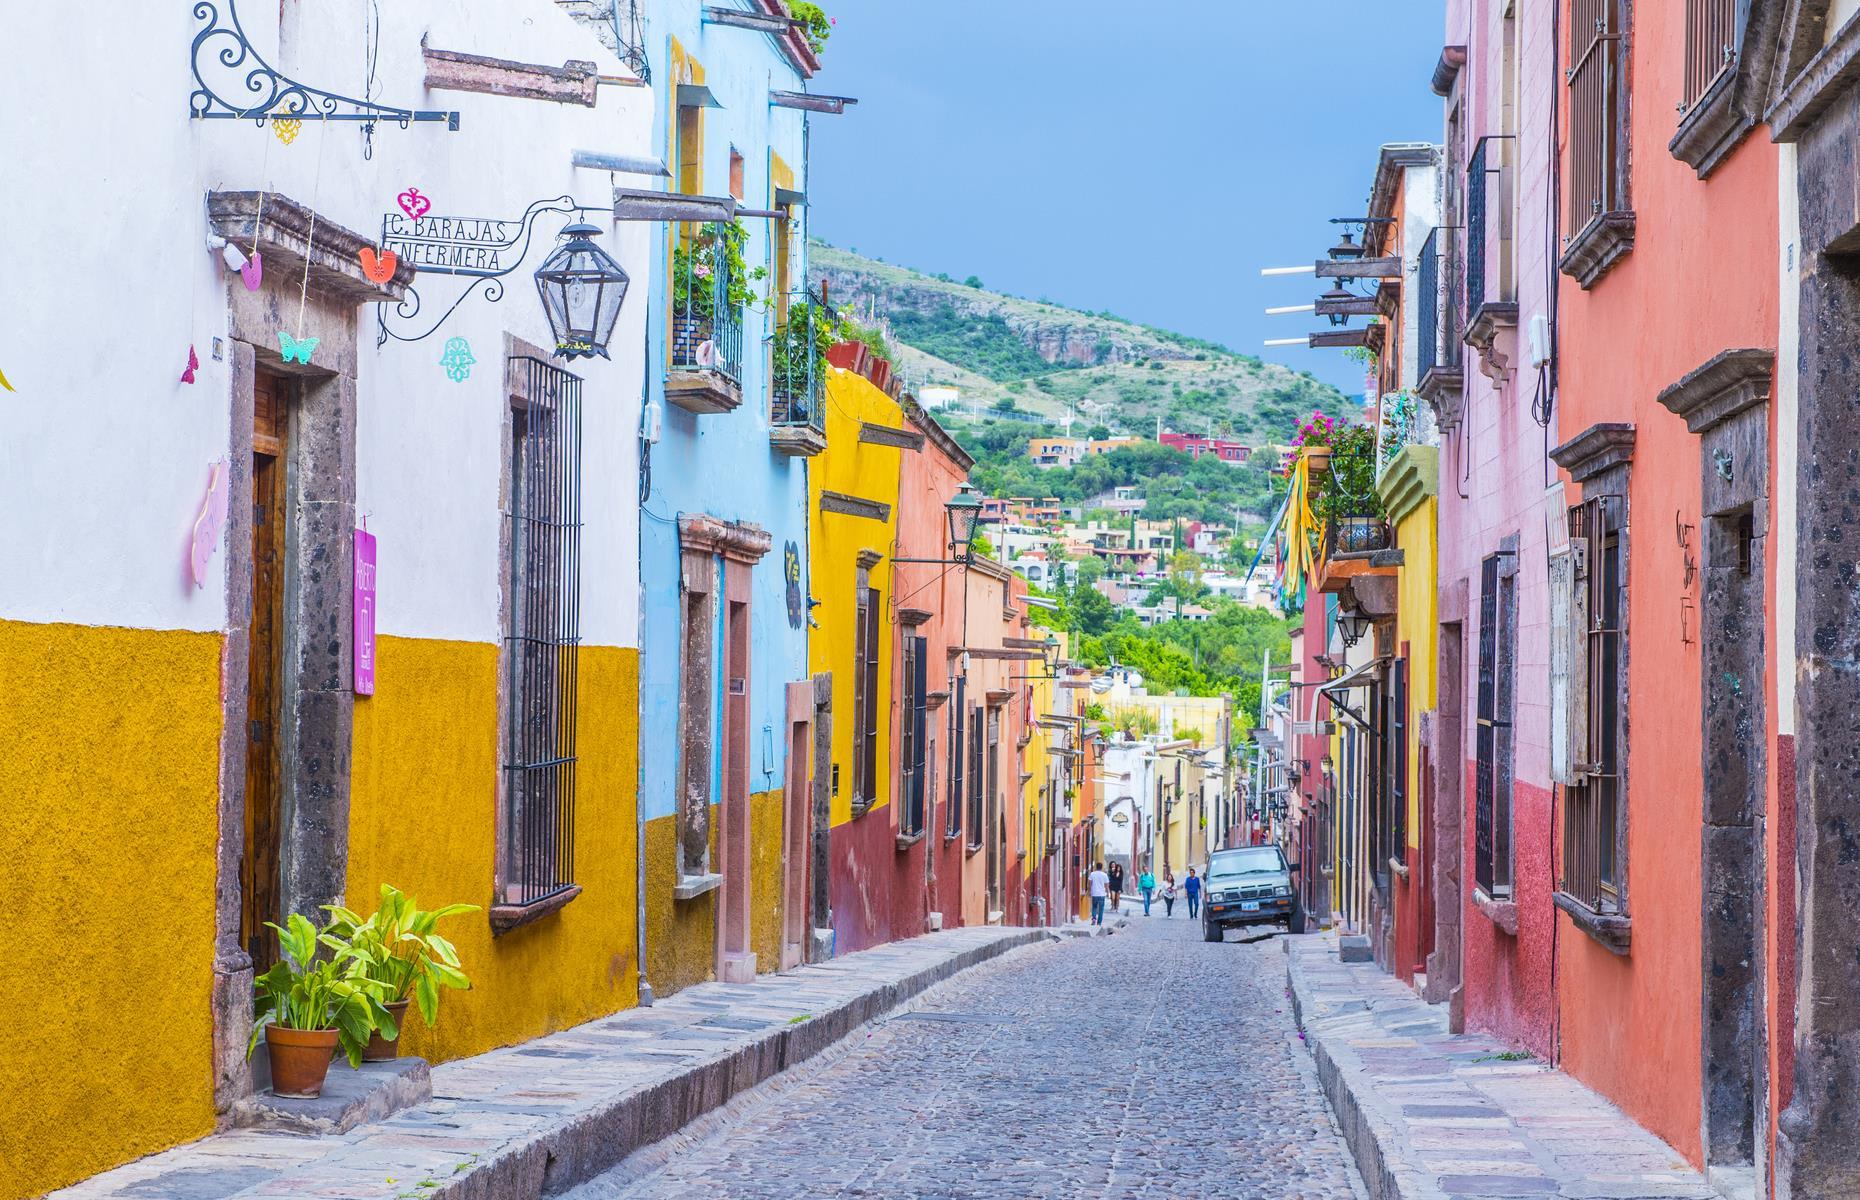 <p>Once the land of the Maya and Aztec civilizations, Mexico is steeped in history and culture. With ancient ruins, beautiful beaches, enchanting cities and incredible food there are countless memorable experiences to be had. This is by no means a definitive list, but here are 30 awe-inspiring things to do in Mexico to get you started.</p>